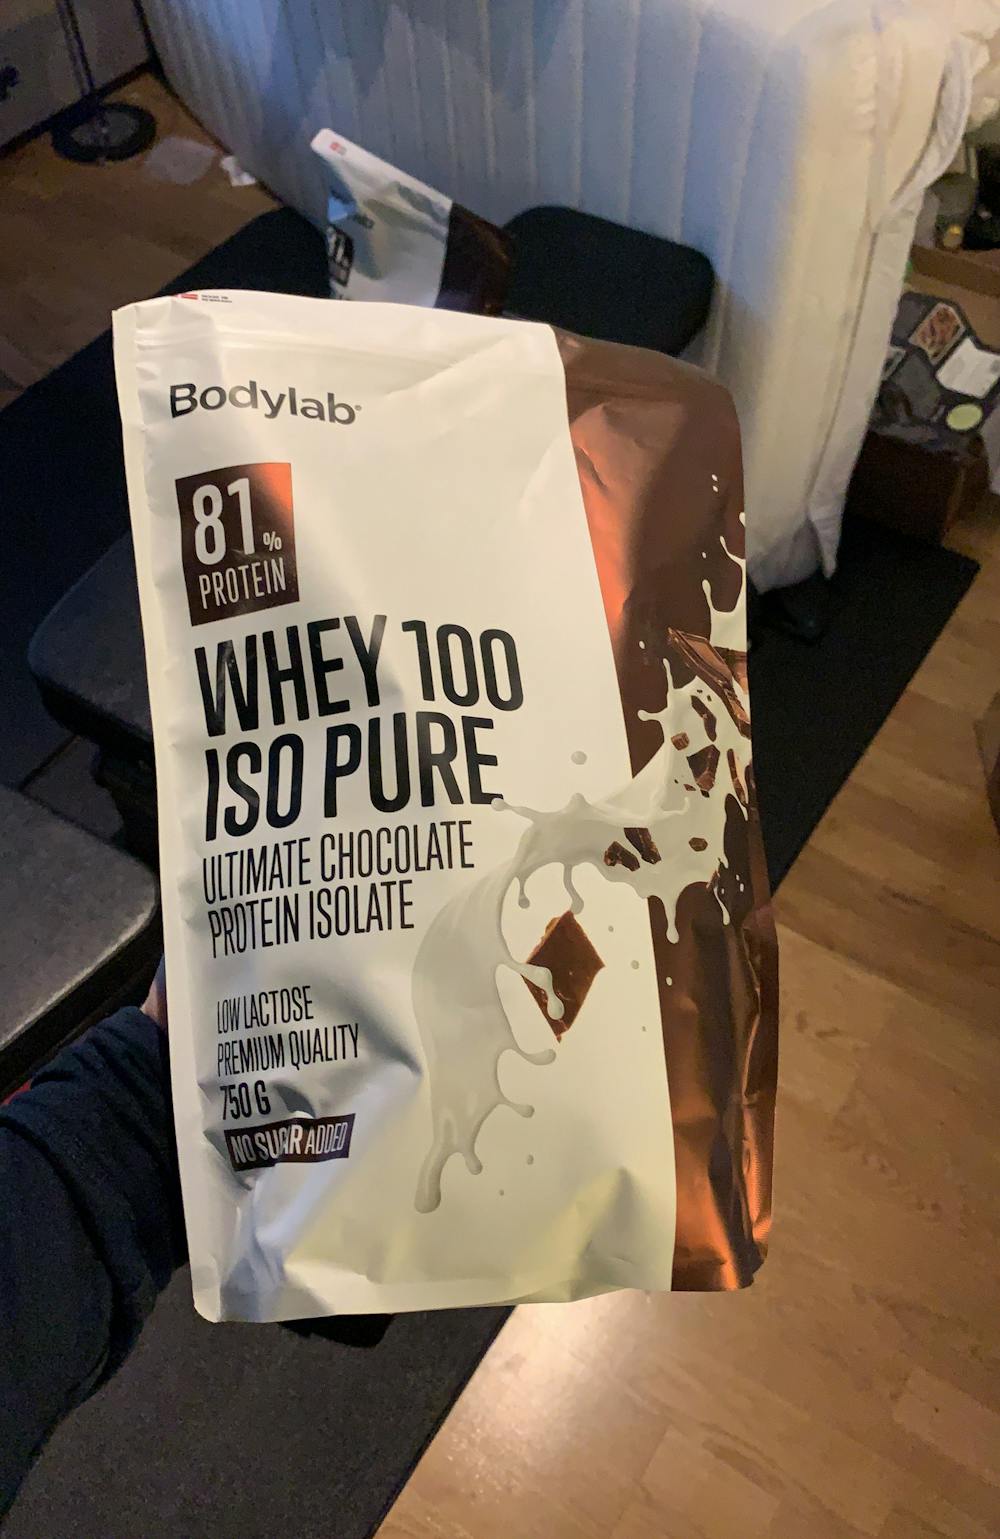 Whey 100 iso pure, ultimate chocolate, Bodylab